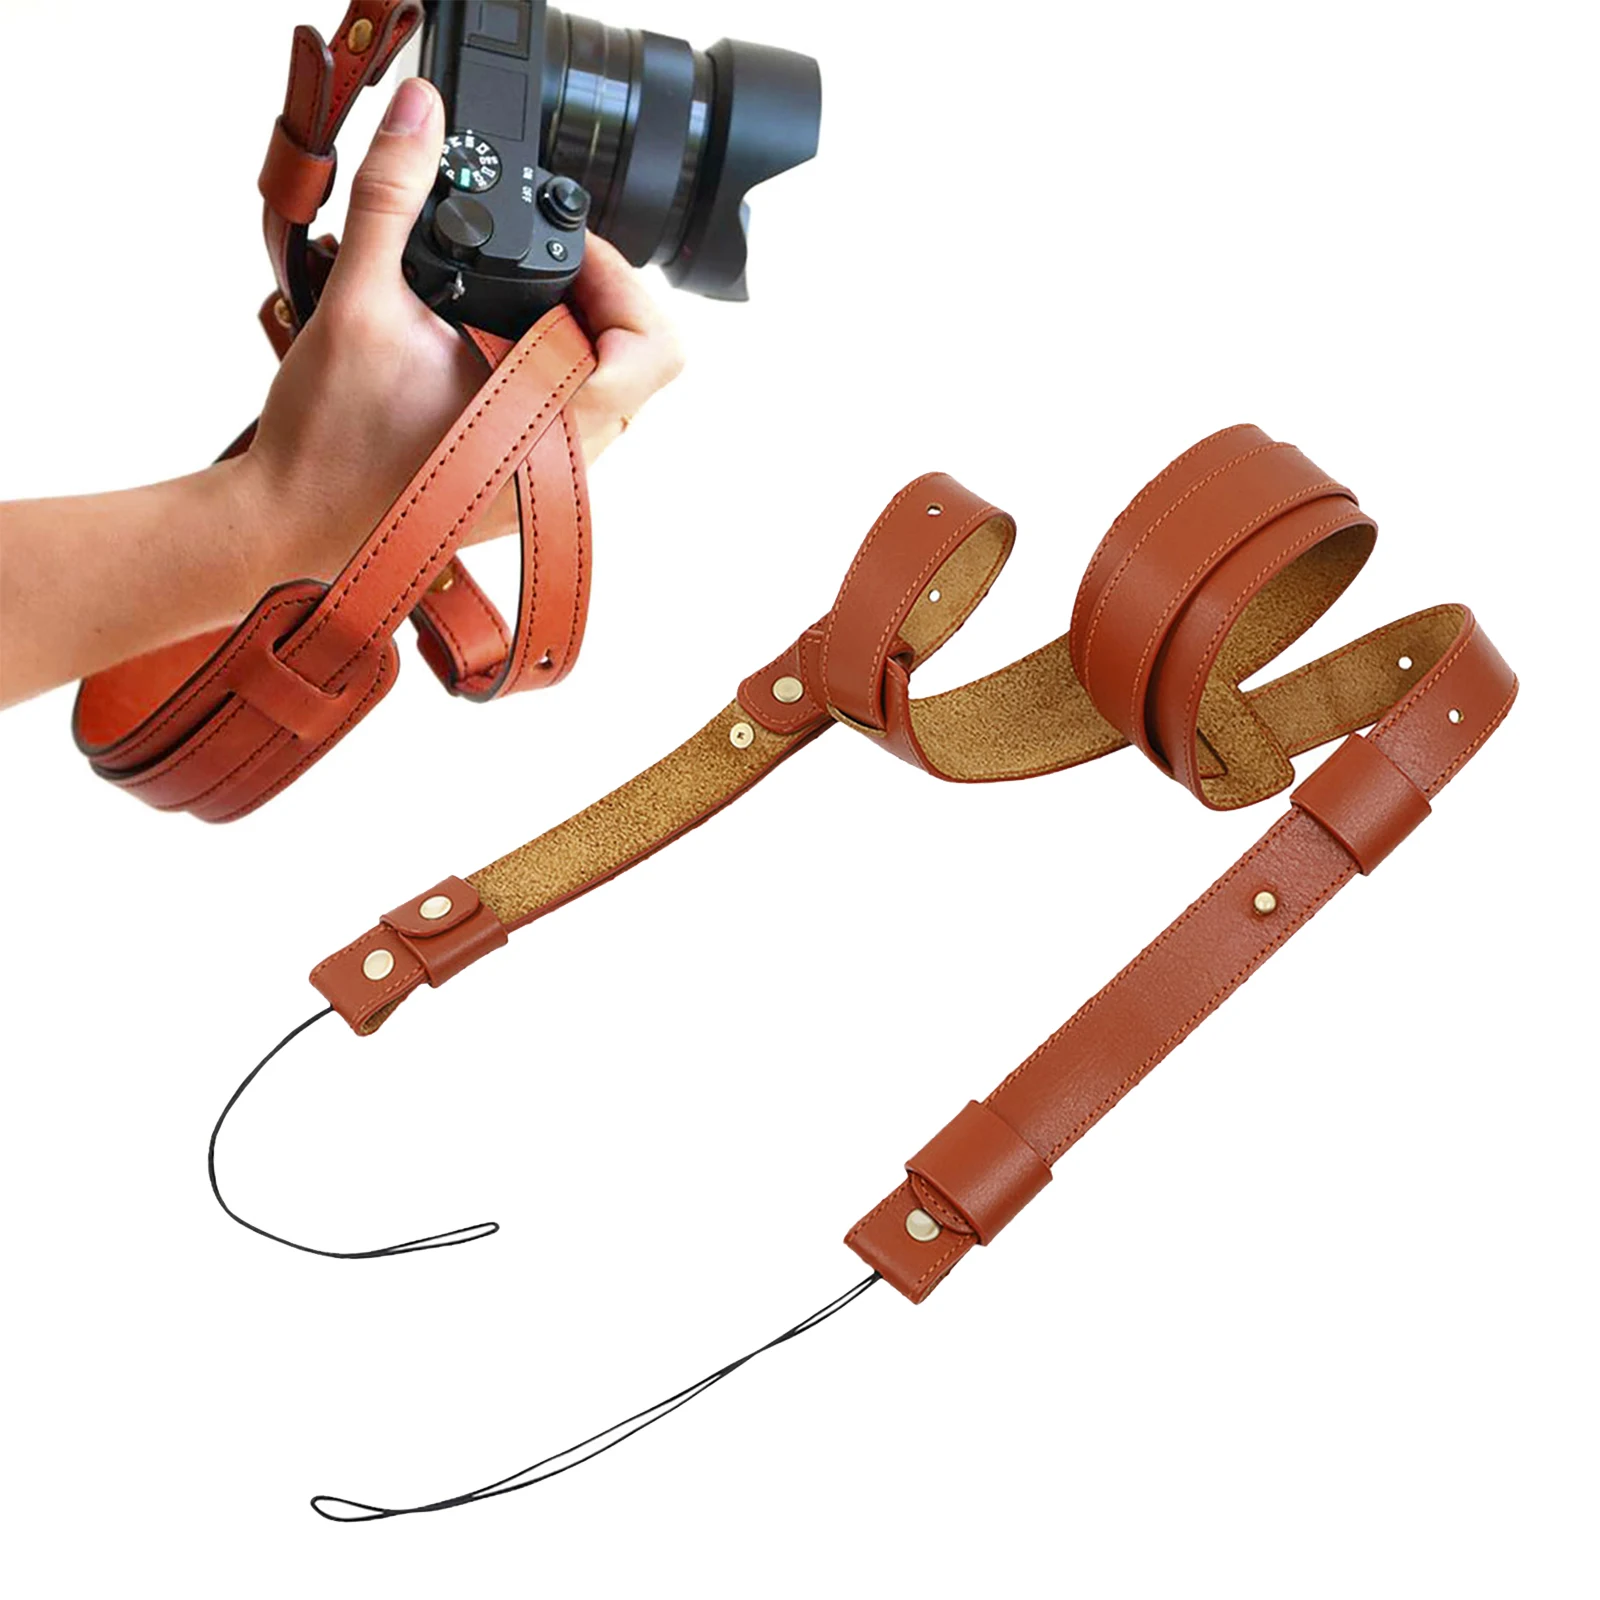 Camera Neck Straps Cowhide Safety Connect Anti-Lost Shoulder Strap for All Camera Lanyard for Photographers